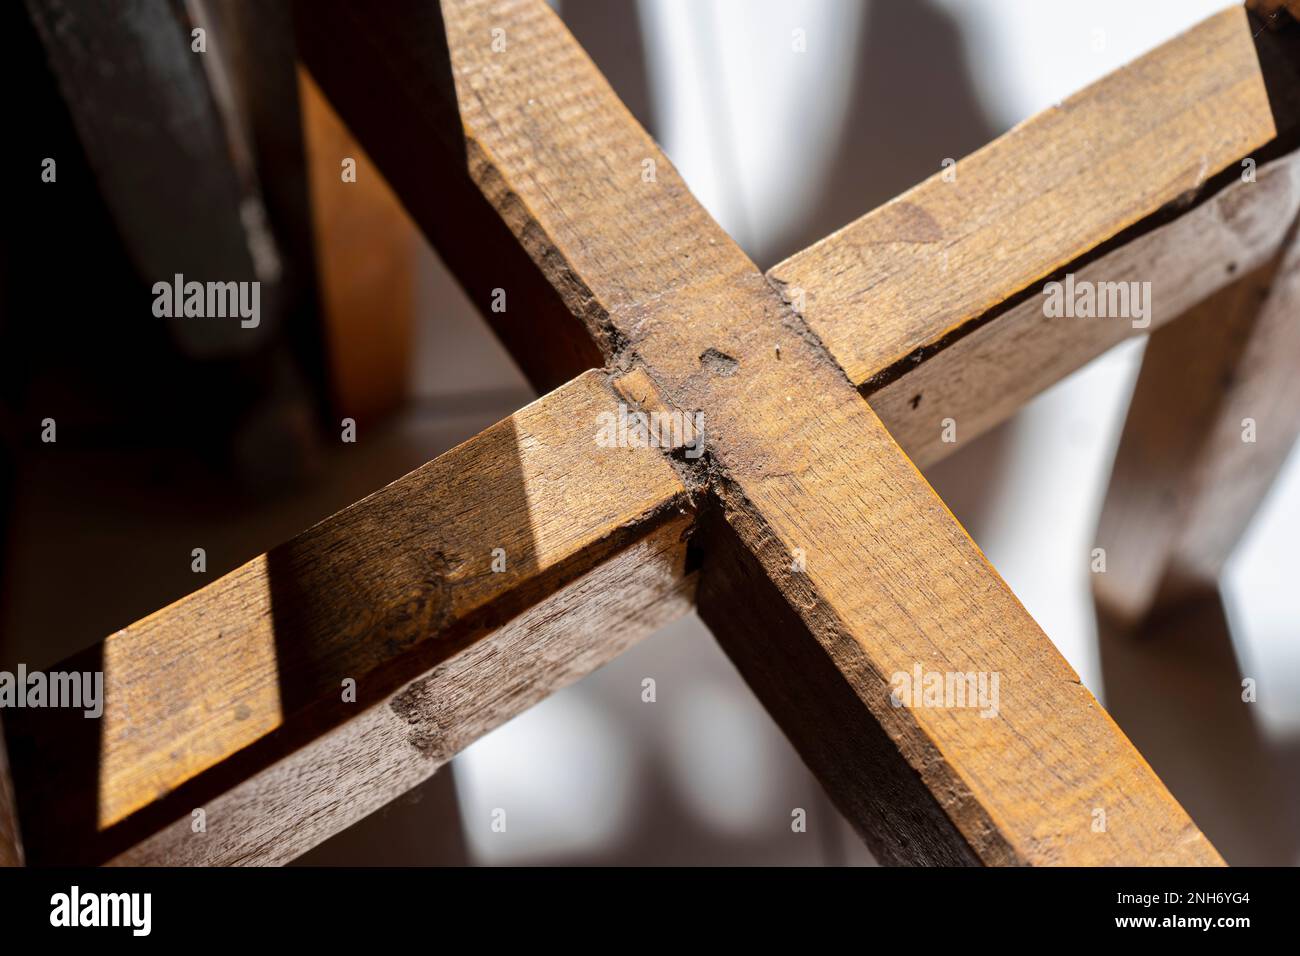 Wooden cross concept design for Christianity background Stock Photo